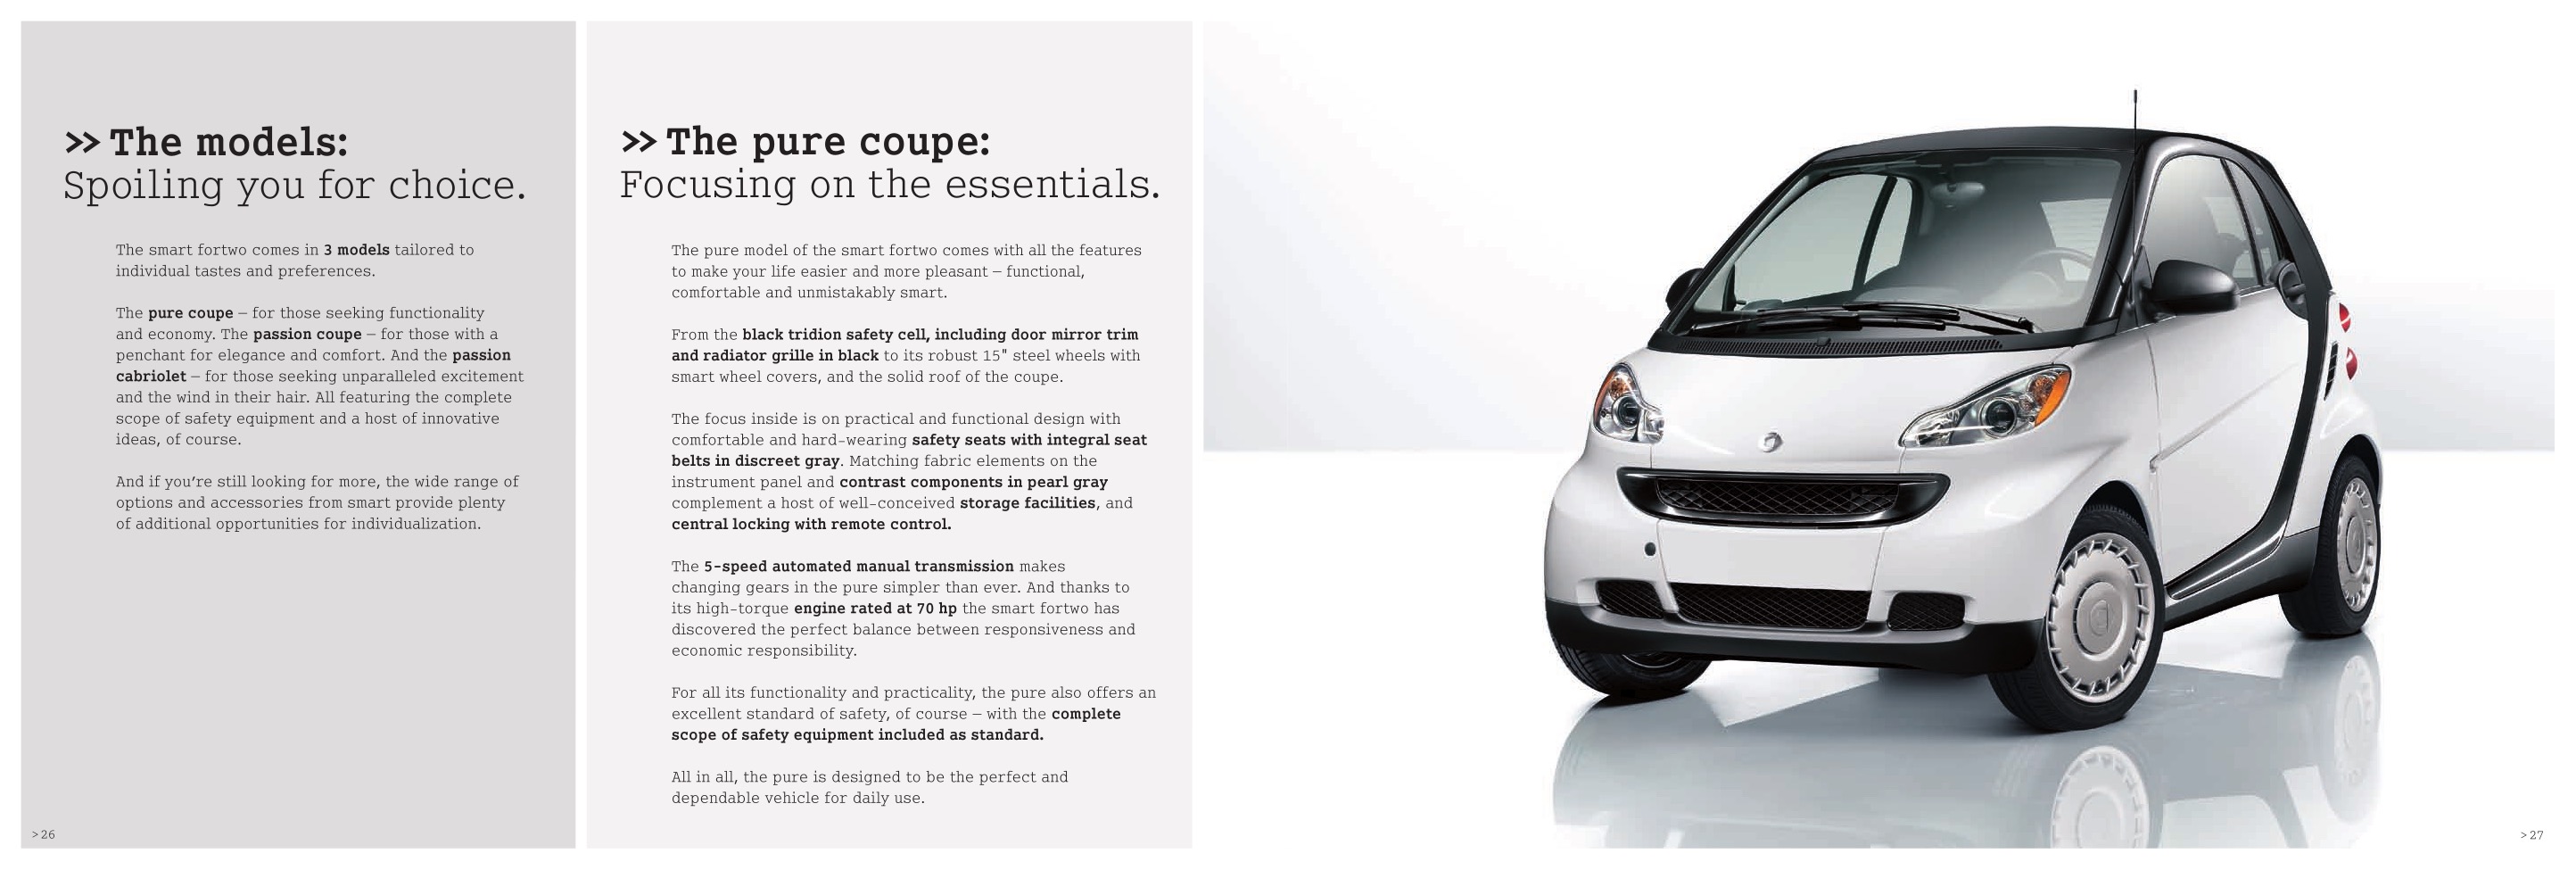 2009 Smart Fortwo Brochure Page 7